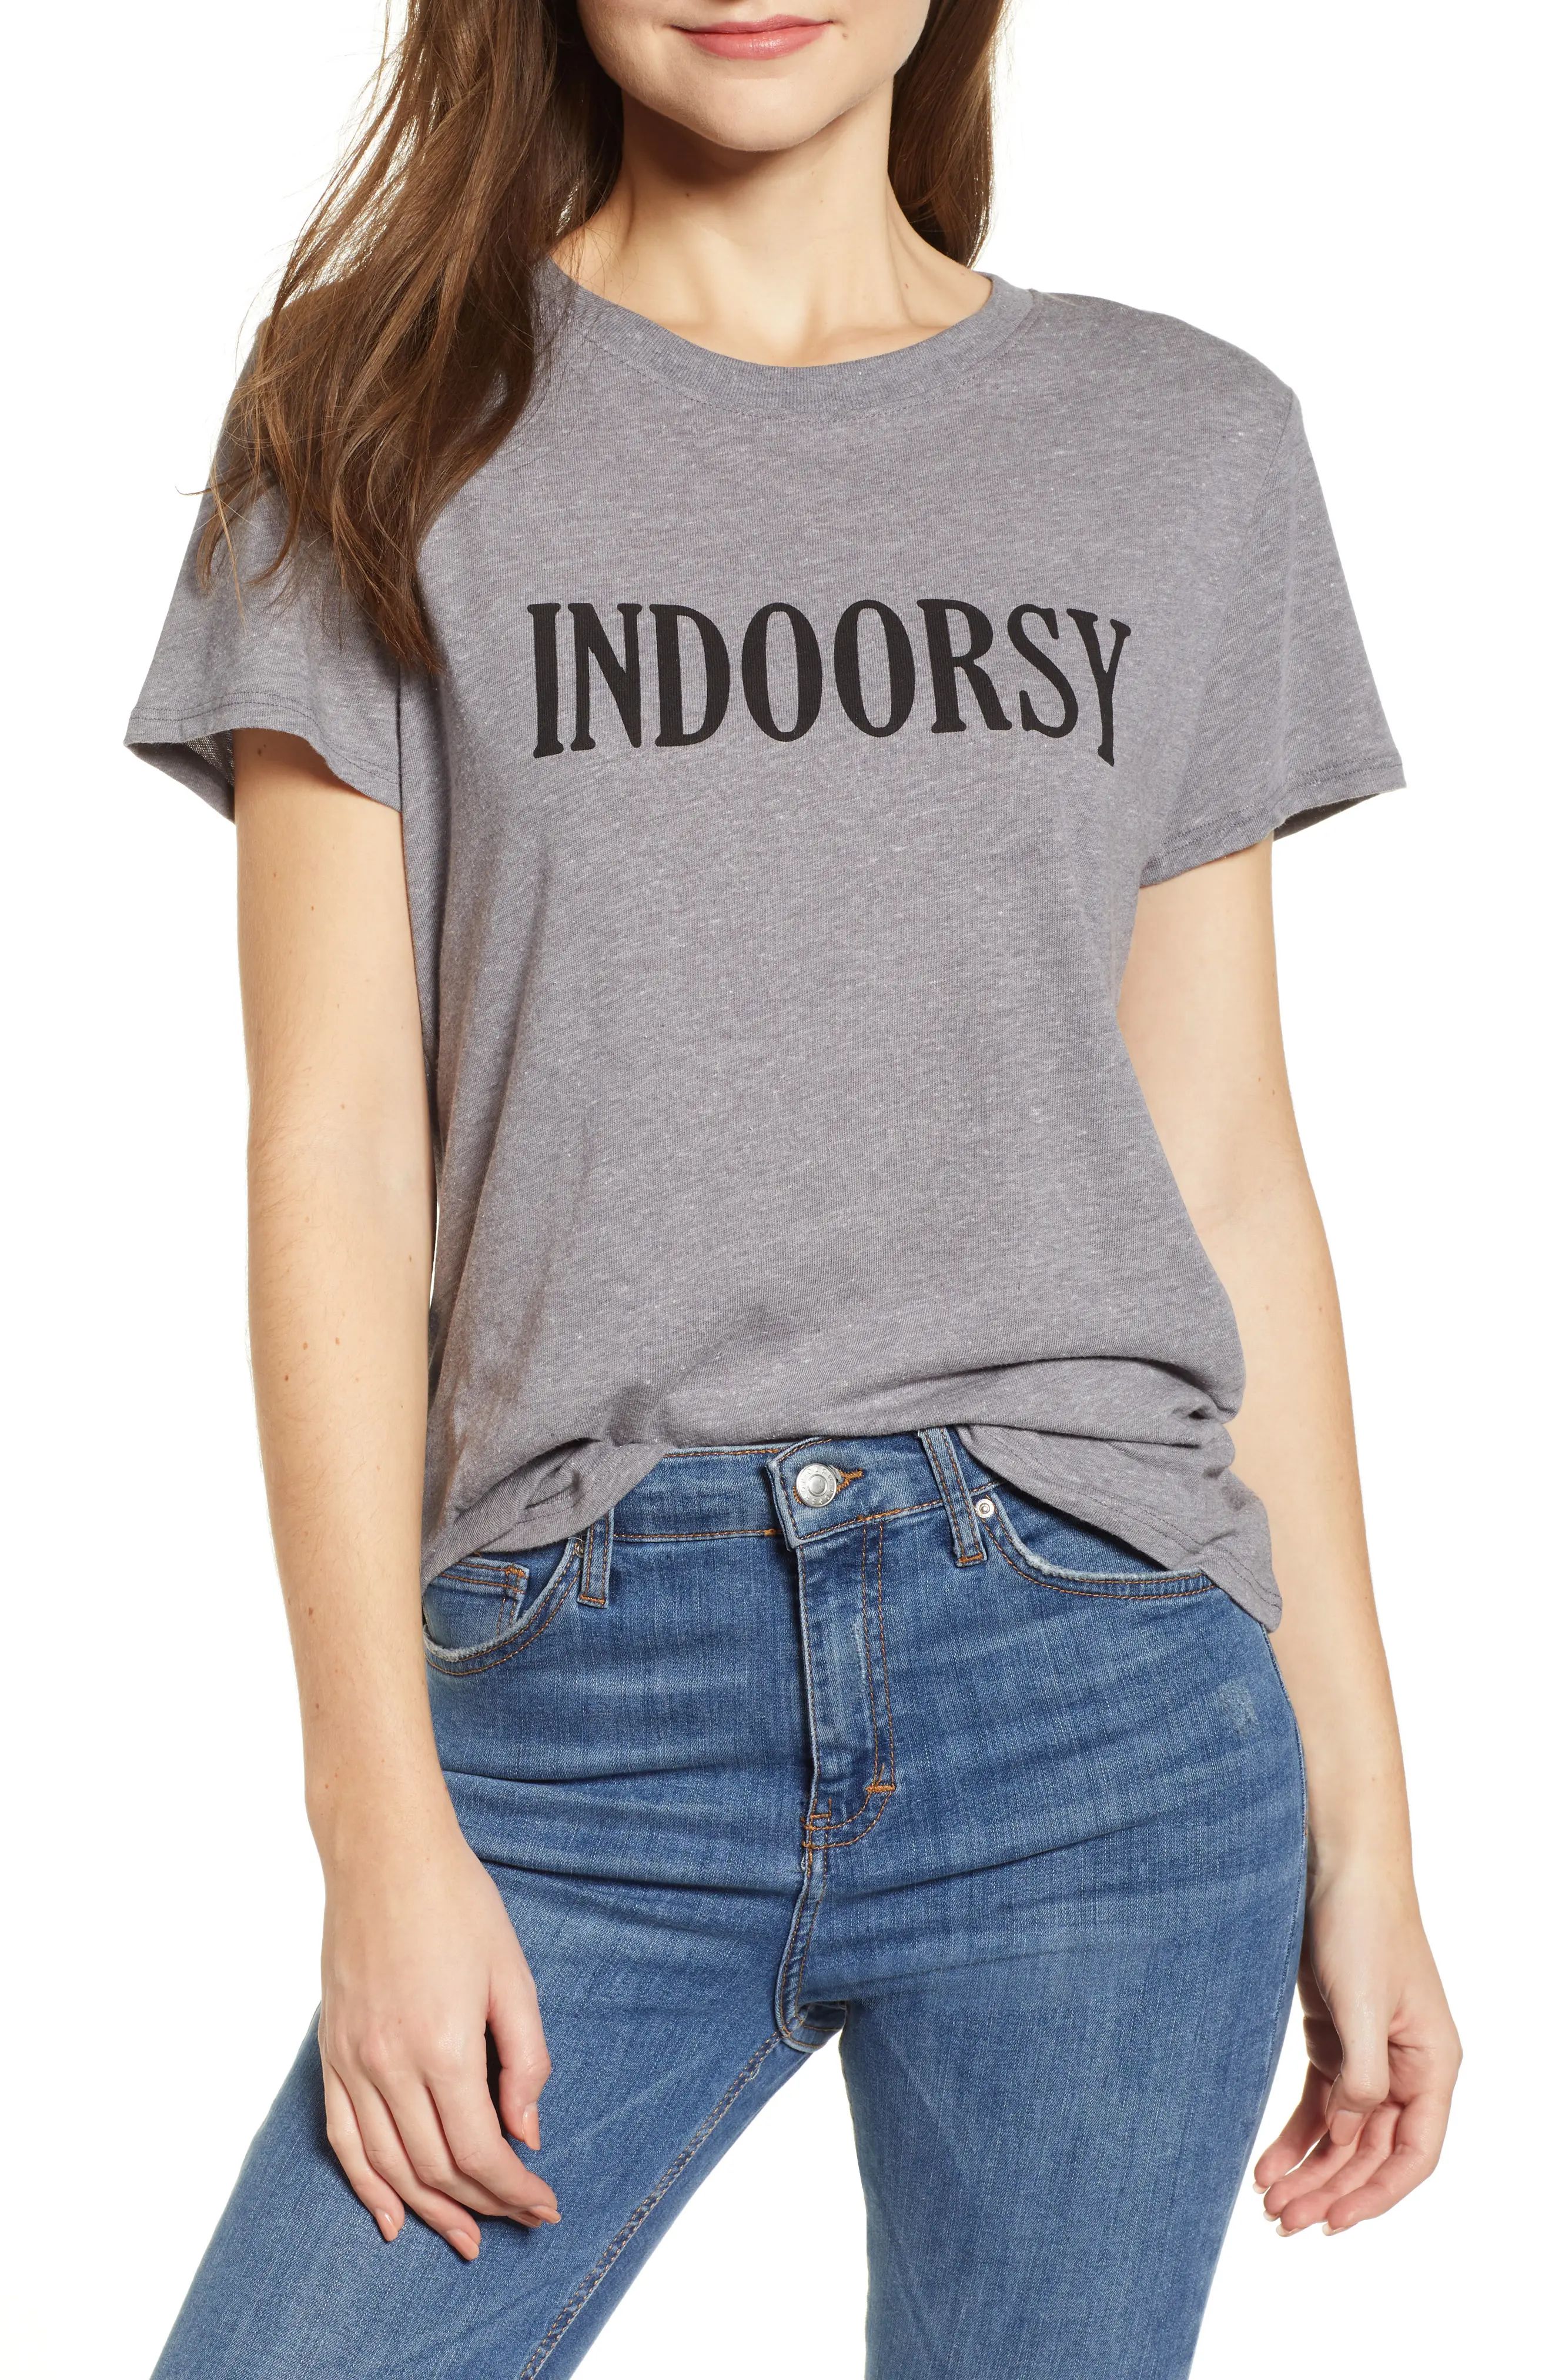 Women's Sub Urban Riot Indoorsy Graphic Tee, Size X-Small - Grey | Nordstrom